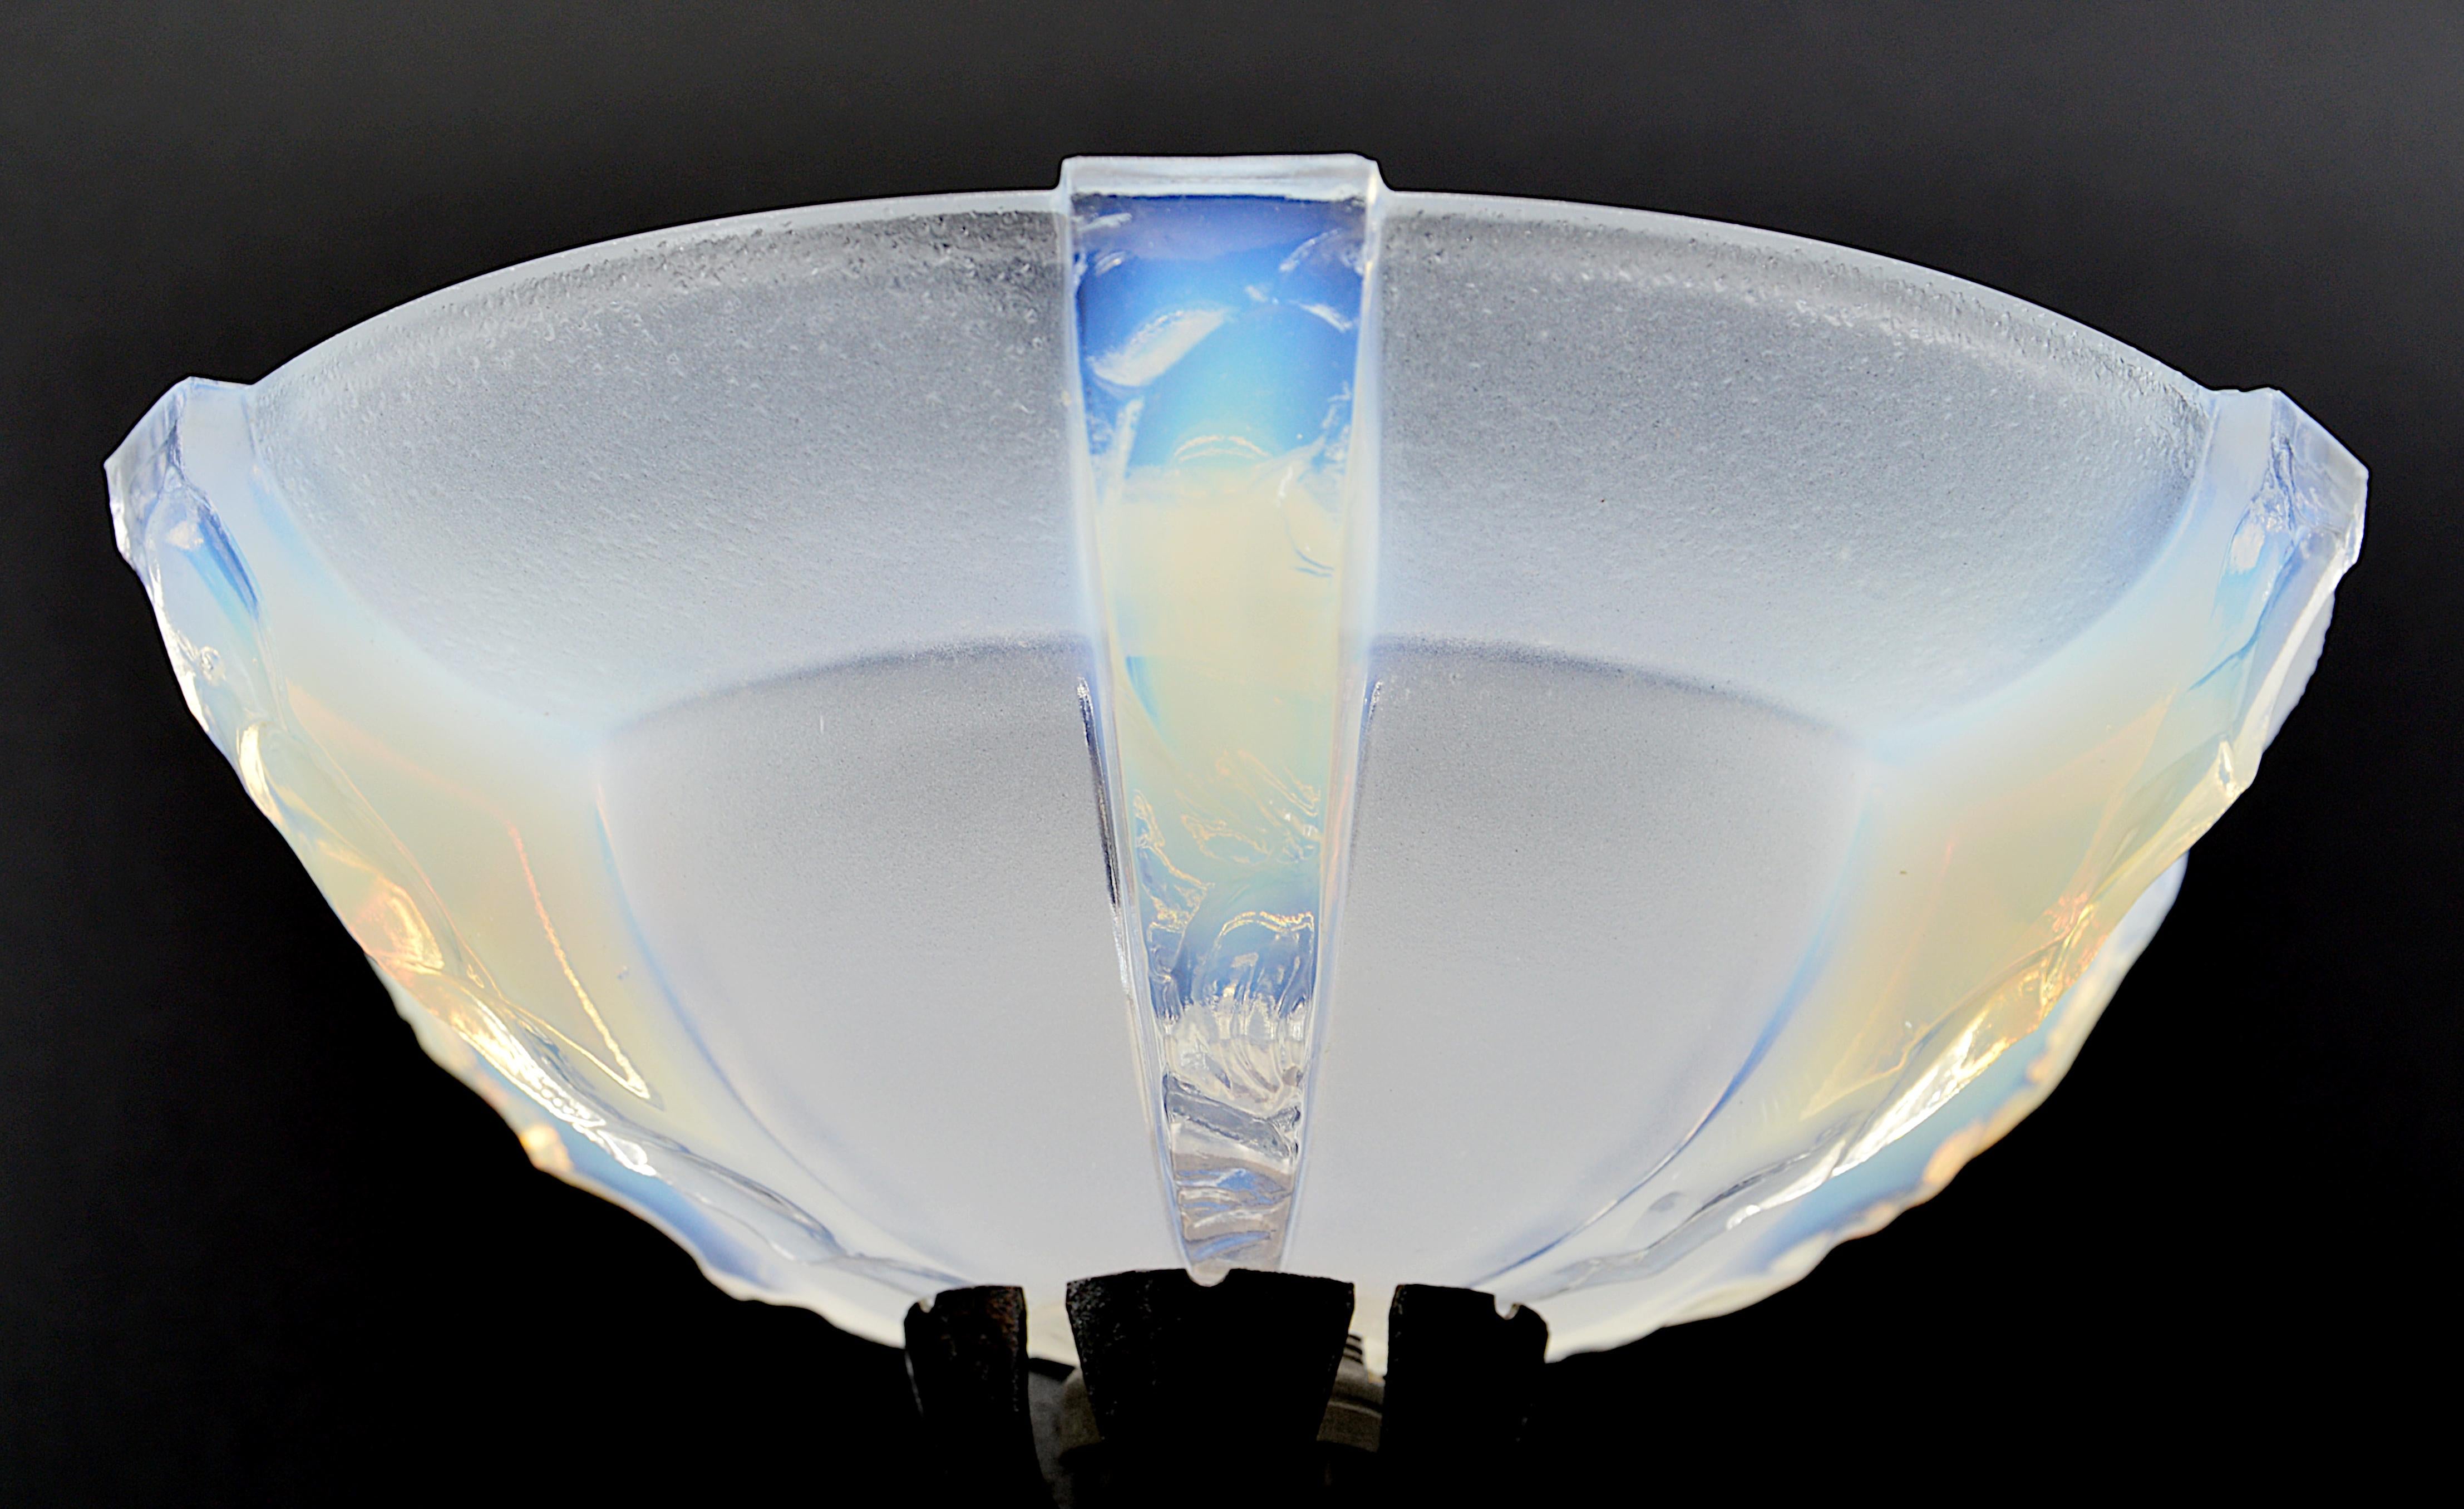 French Art Deco table lamp by Jean Gauthier (Paris), France, 1930s. Thick opalescent semi-crystal shade with an Art Deco pattern. Depending on the exposure to light, opalescent blue predominates slightly. Wrought iron base by Le Fer Forge (Lyon).